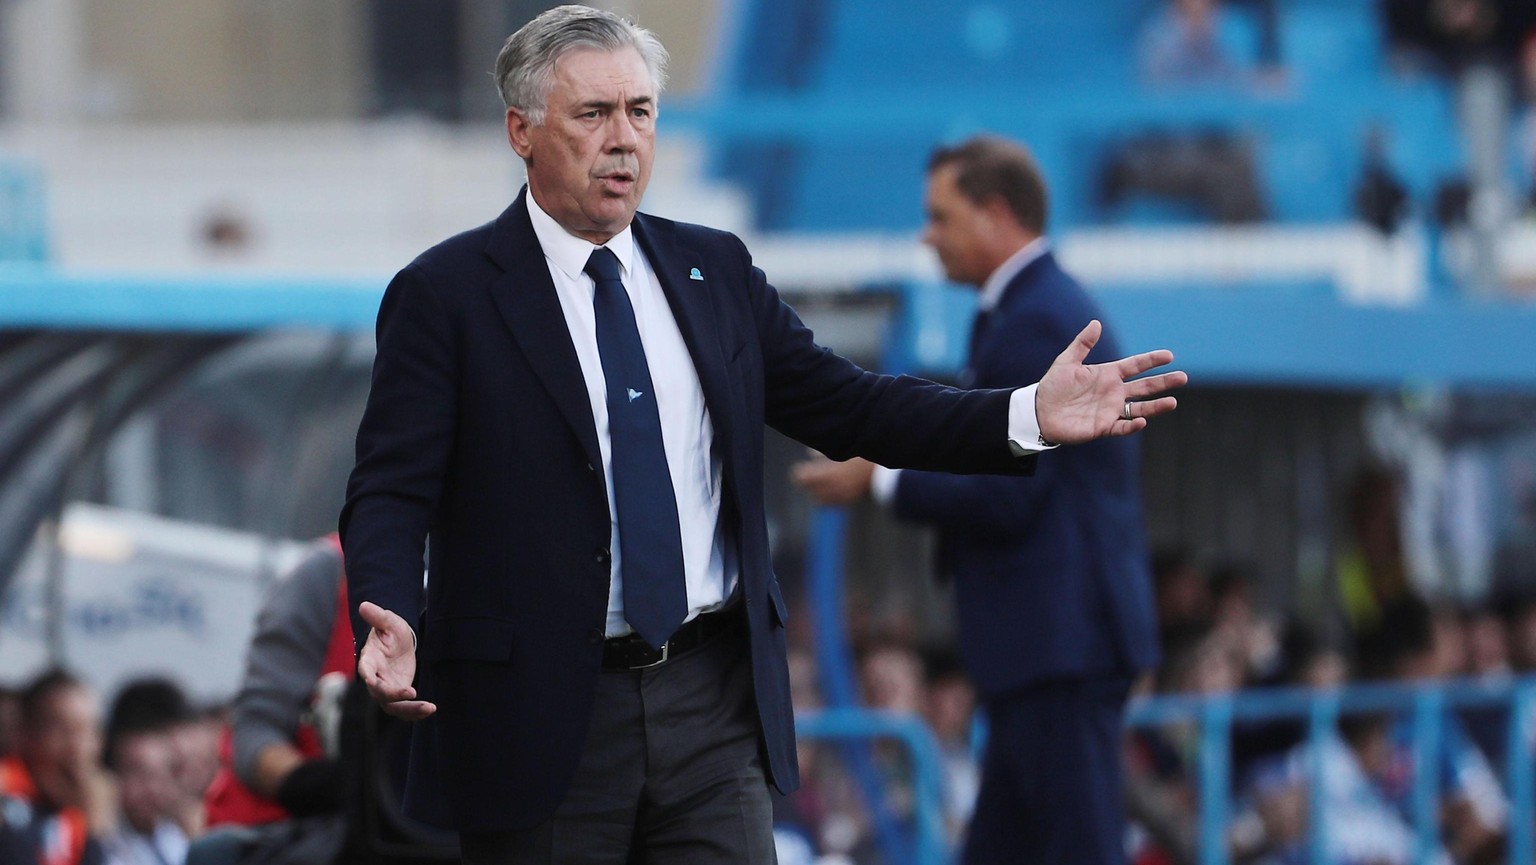 Napoli&#039;s head coach Carlo Ancelotti gestures during the Italian Serie A soccer match between Spal and Napoli, at the Paolo Mazza stadium in Ferrara, Italy, Sunday, Oct. 27, 2019. (Serena Campanni ...